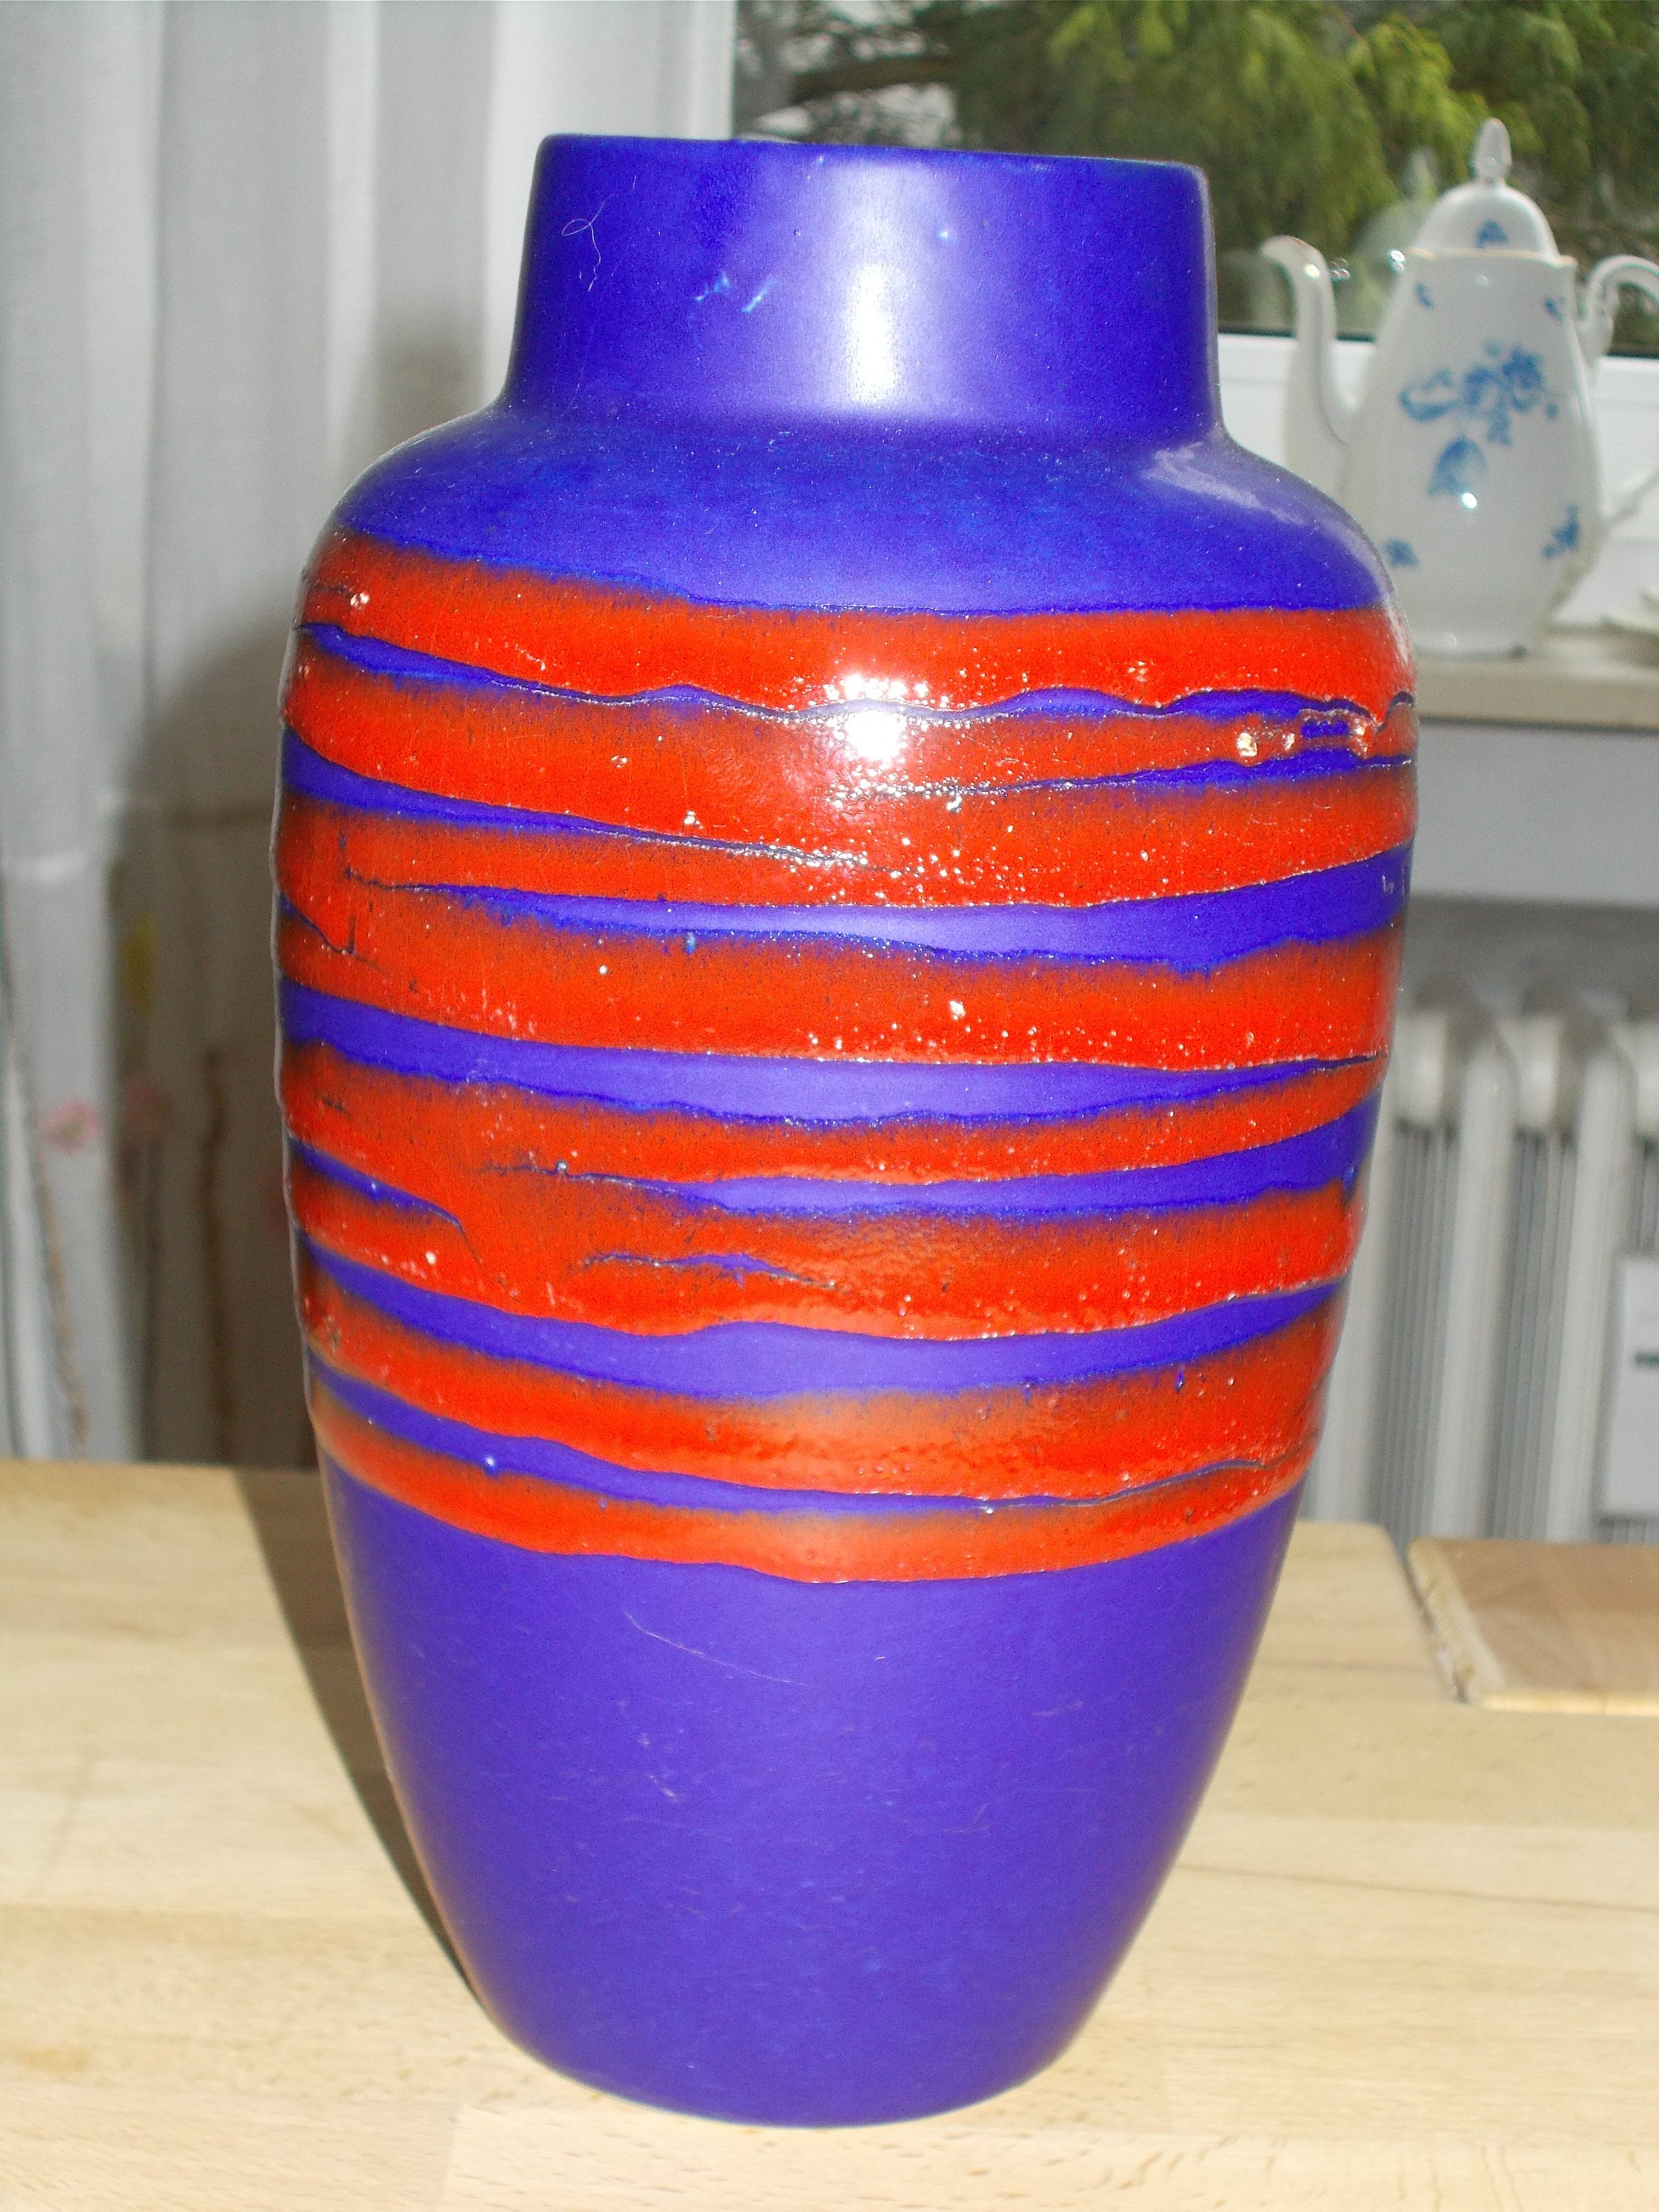 circumference 38.5 cm. Height 22 cm Ceramic vase in striking red and blue